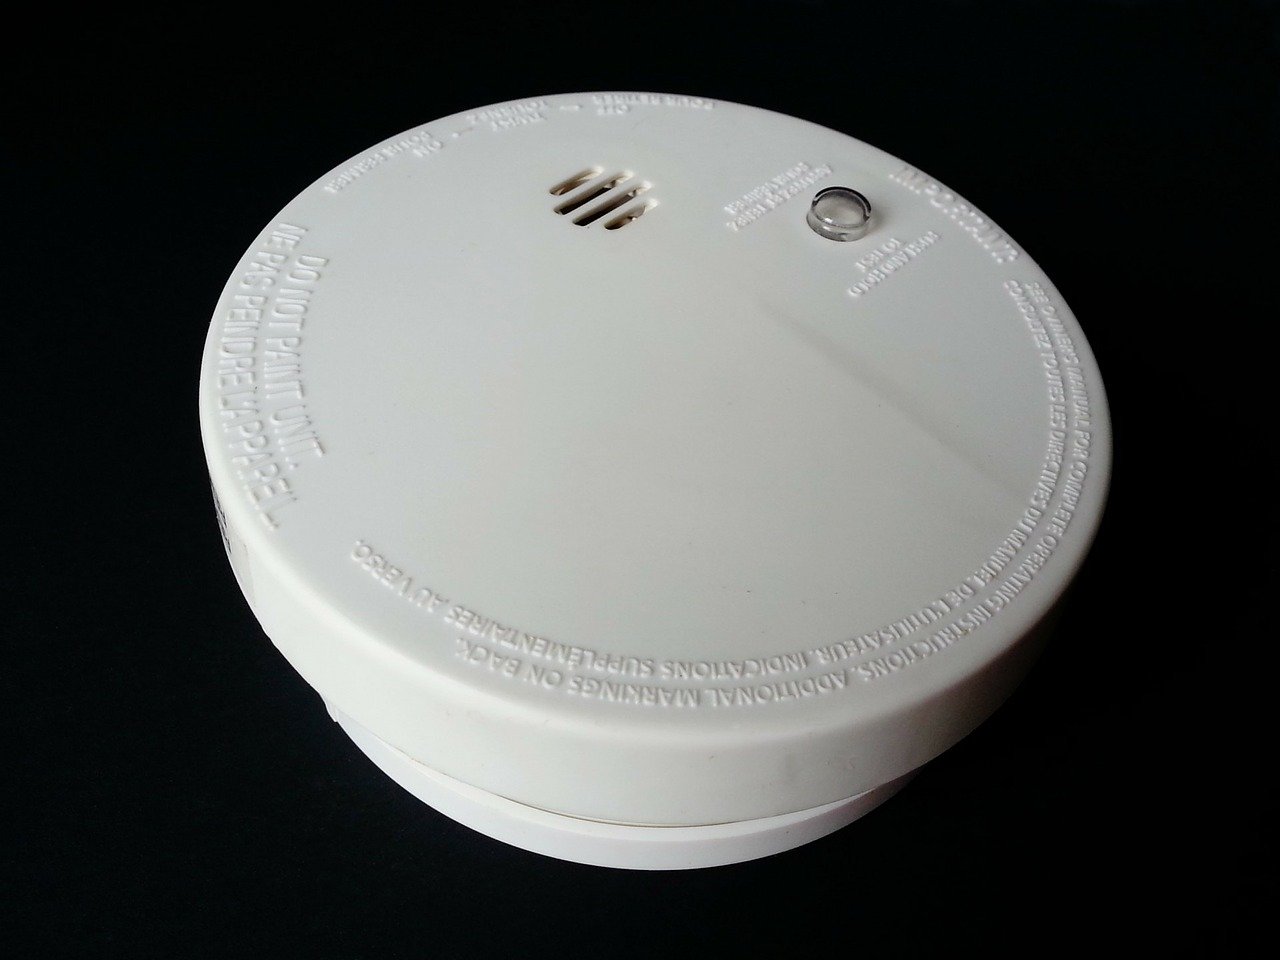 Is it worth it to install motion detectors in the home?